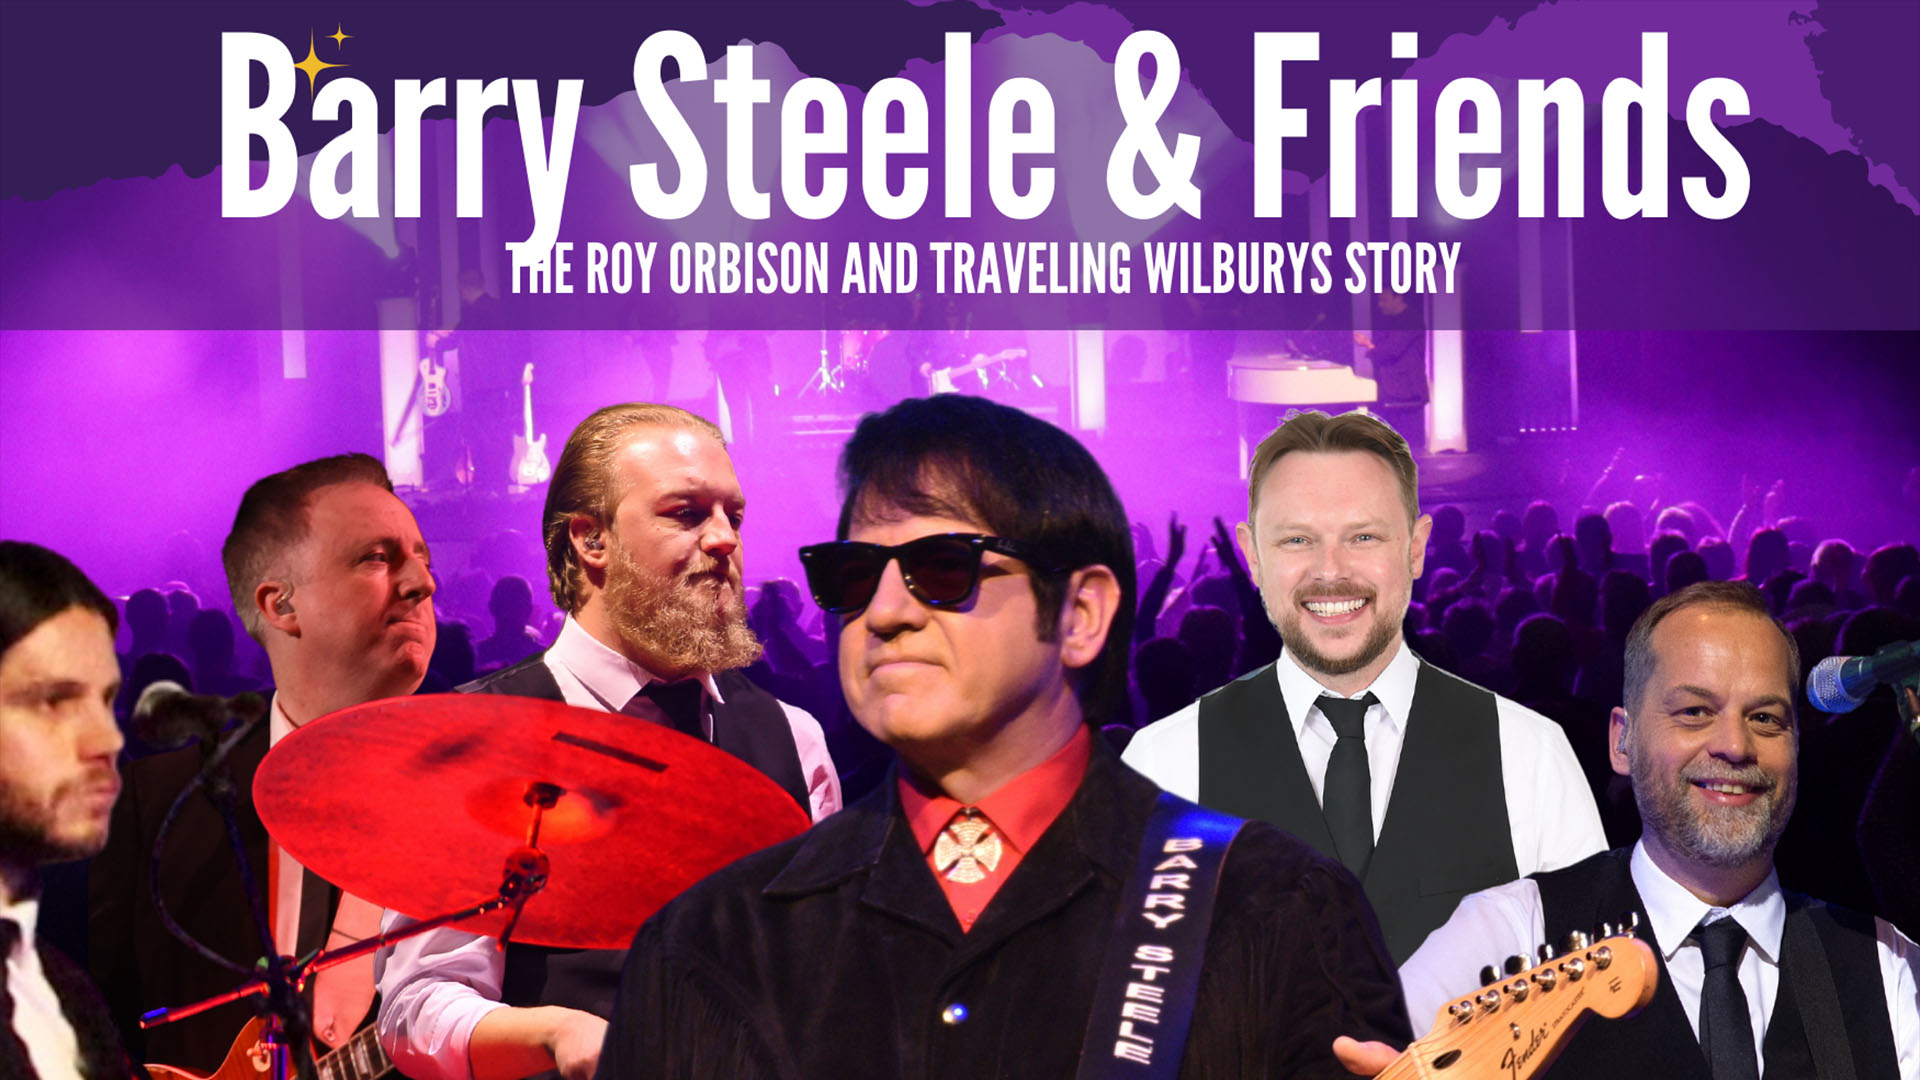 Barry Steele &#038; Friends: The Roy Orbison and Traveling Wilbury&#8217;s Story